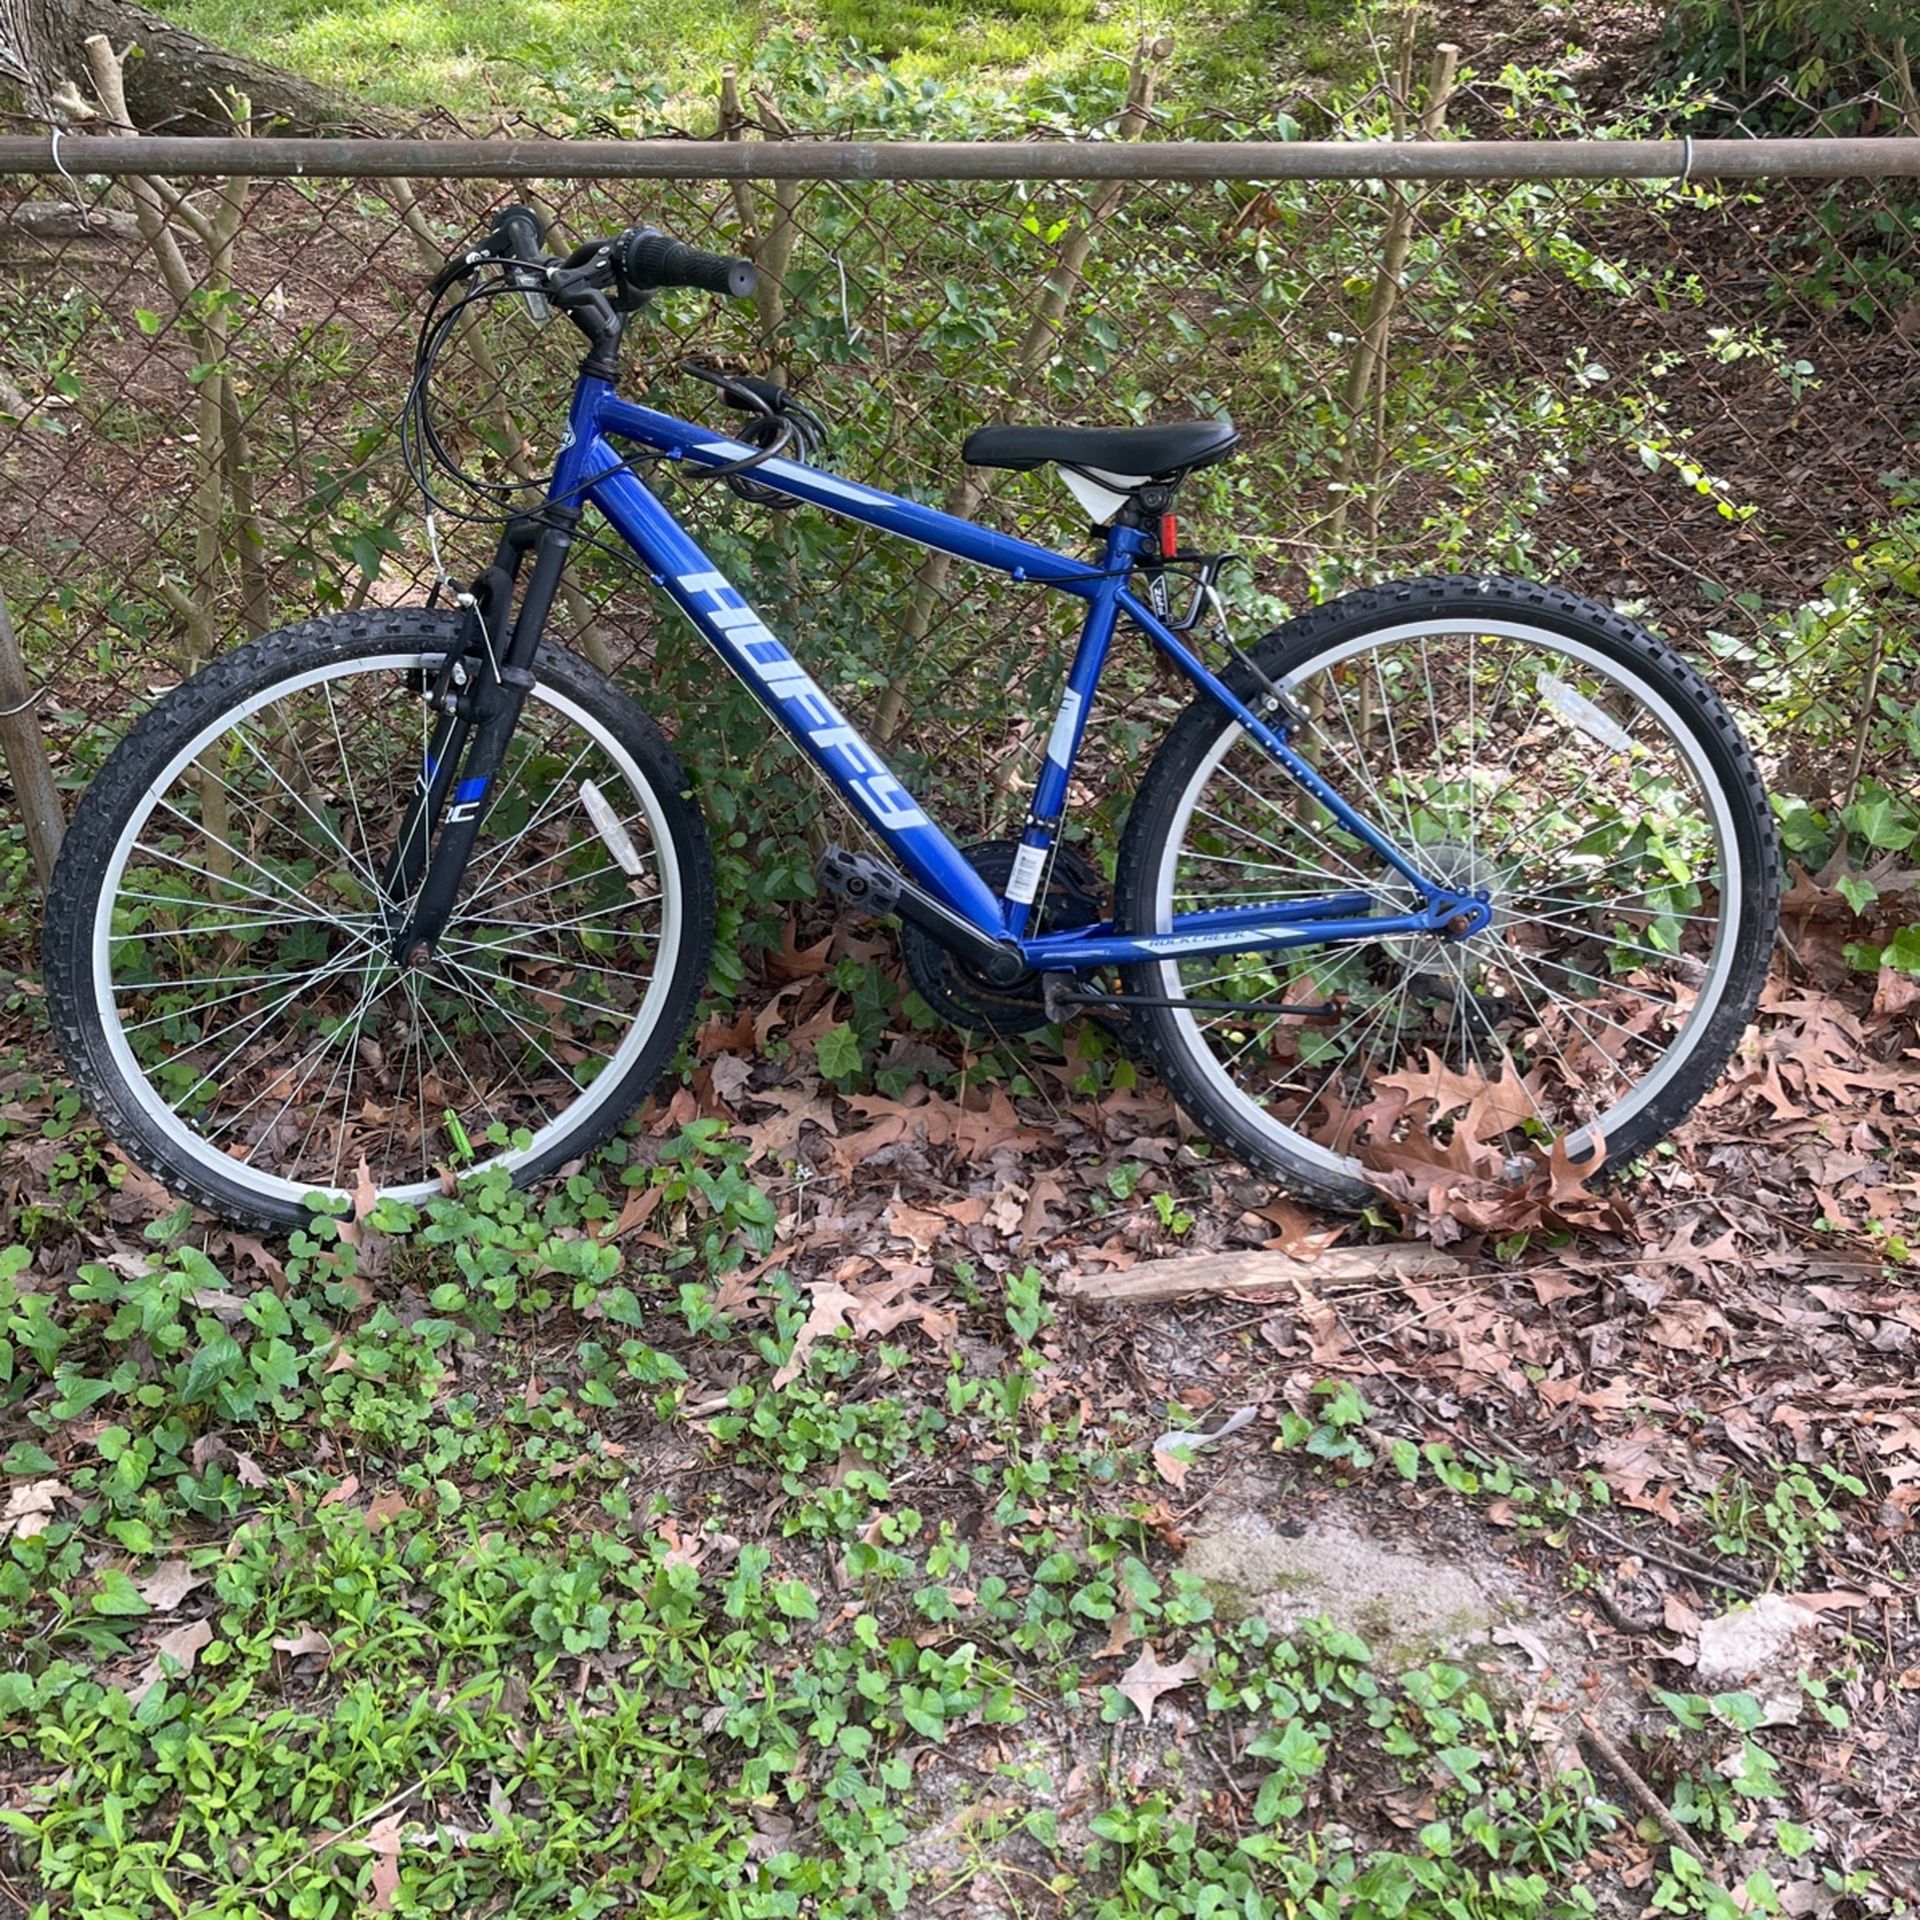 Huffy Bike Paid Over 100. Asking 60